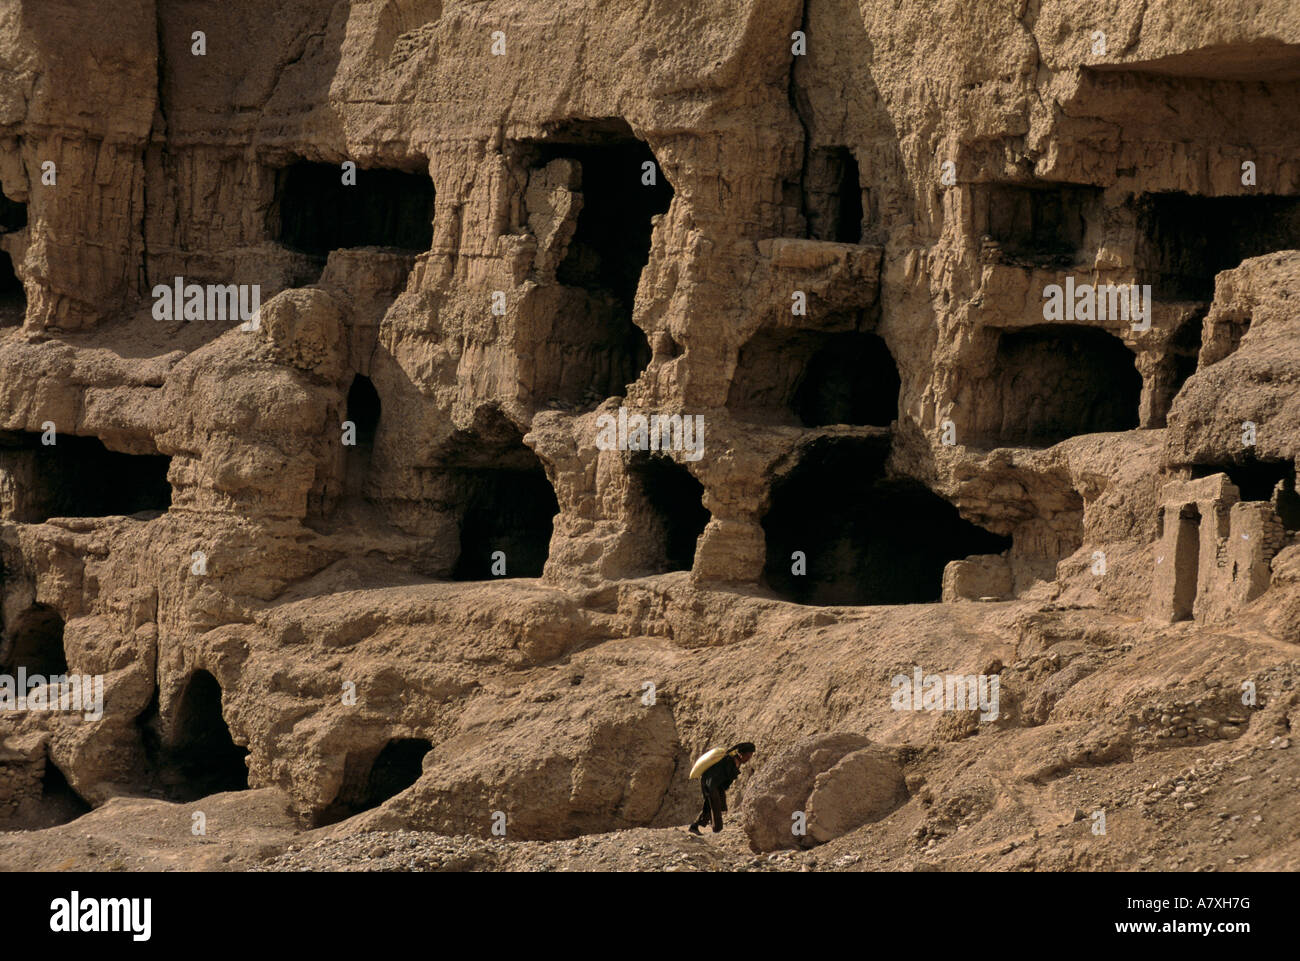 Afghanistan, Monastic Cave blackened by smoke damage due to centuries of inhabitants, UNESCO World Heritage site of Bamiyan Stock Photo